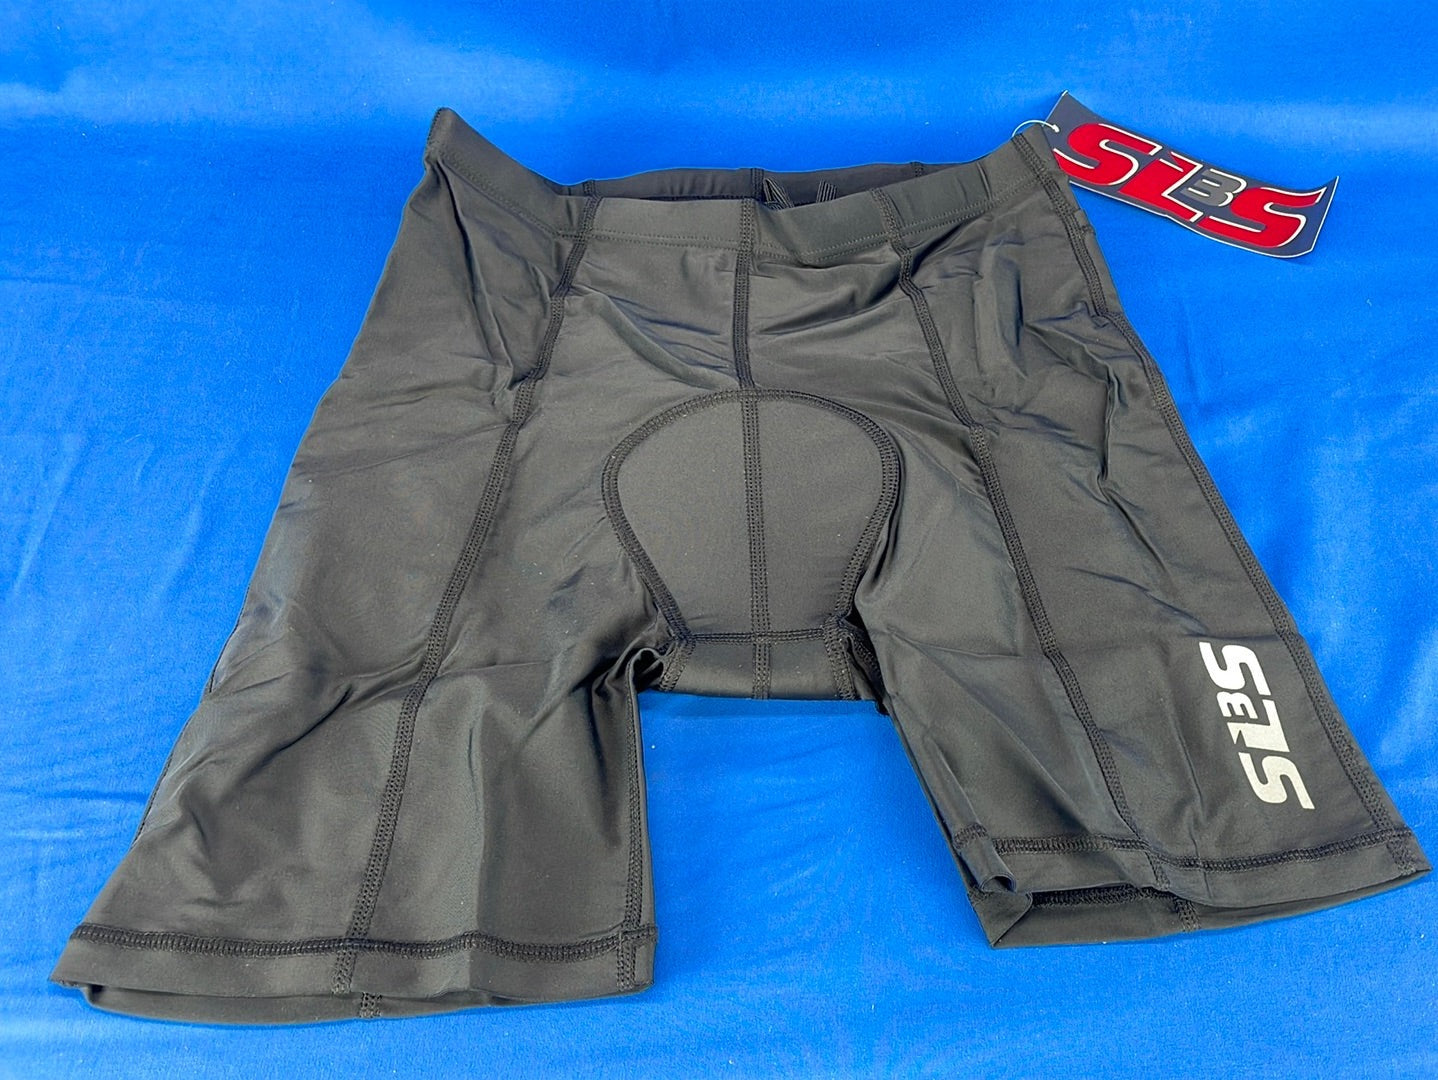 SLS3 Men`s Triathlon FRT 2.0 Tri Shorts - 2 pockets - swim, bike and run with comfort - great from Sprint to Ironman races -Small